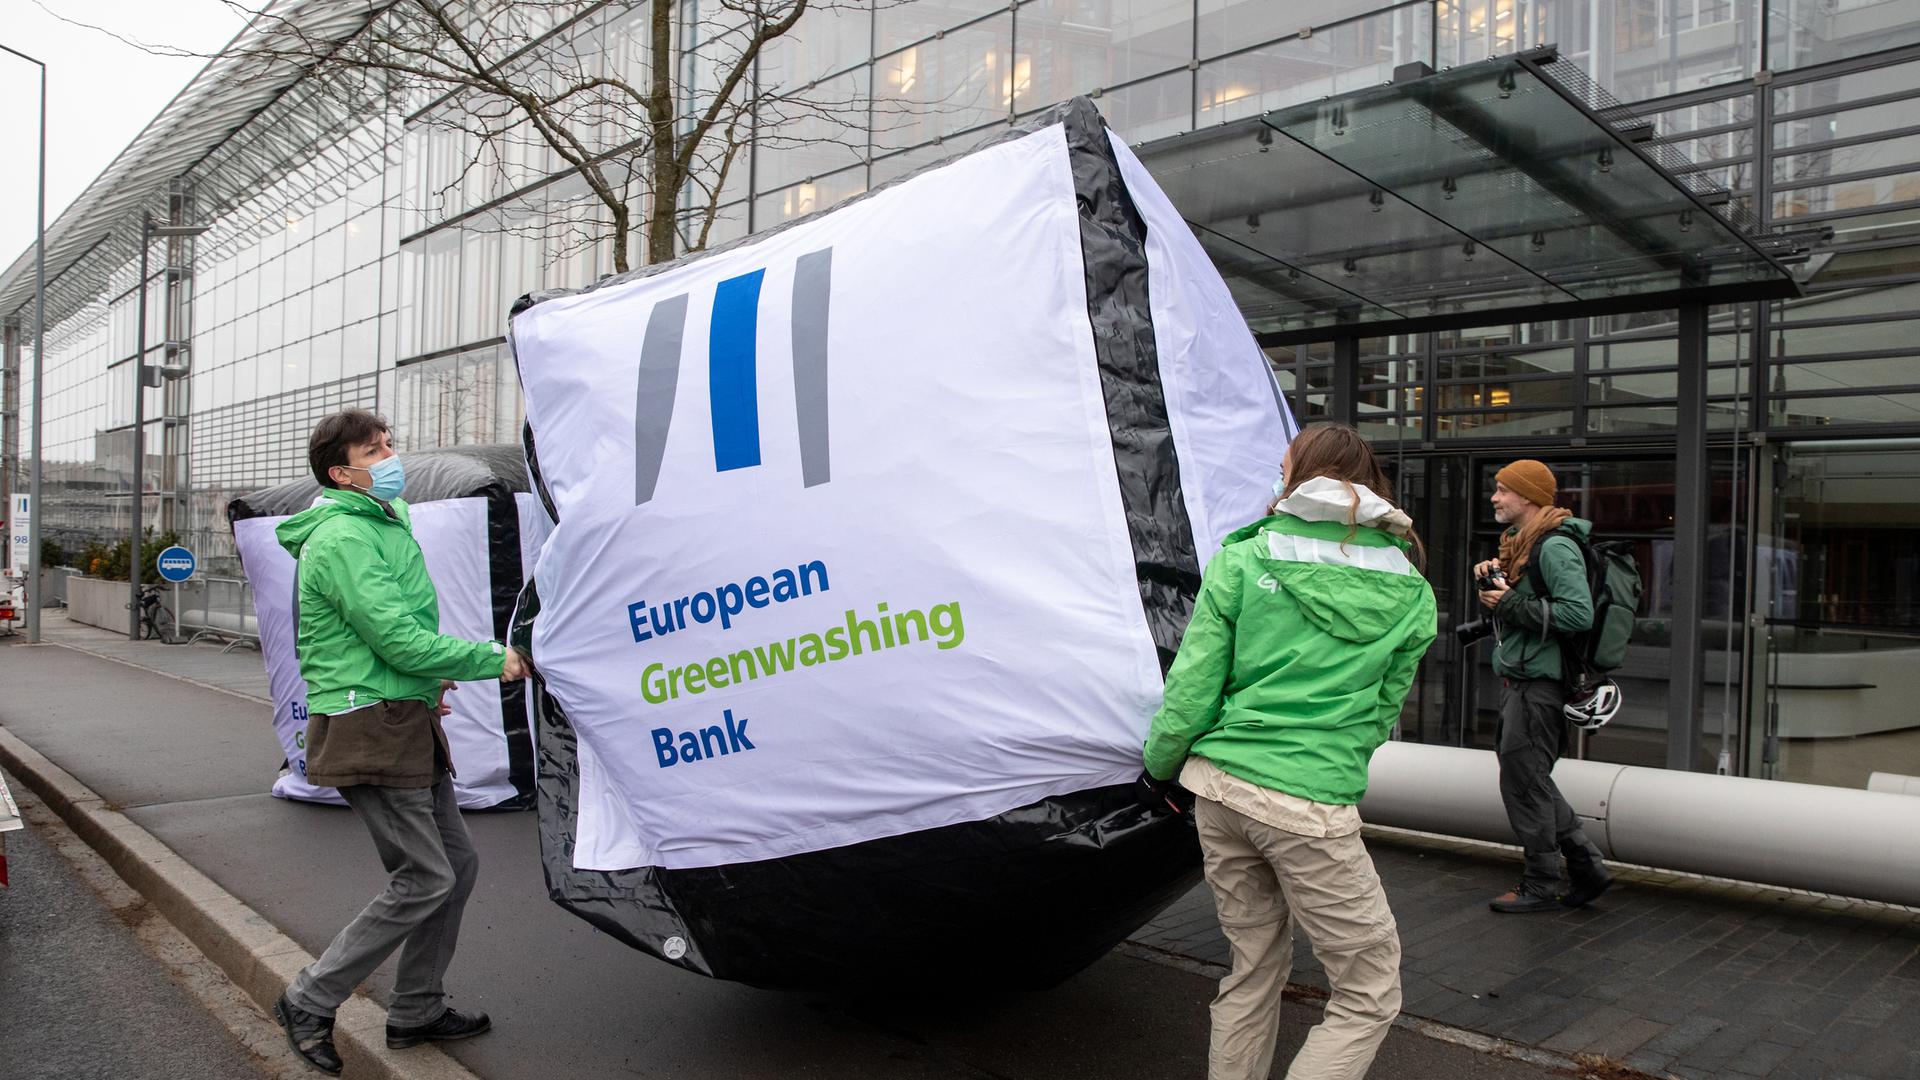 Greenpeace action staged at the European Investment Bank on Wednesday in Luxembourg to protest greenwashing